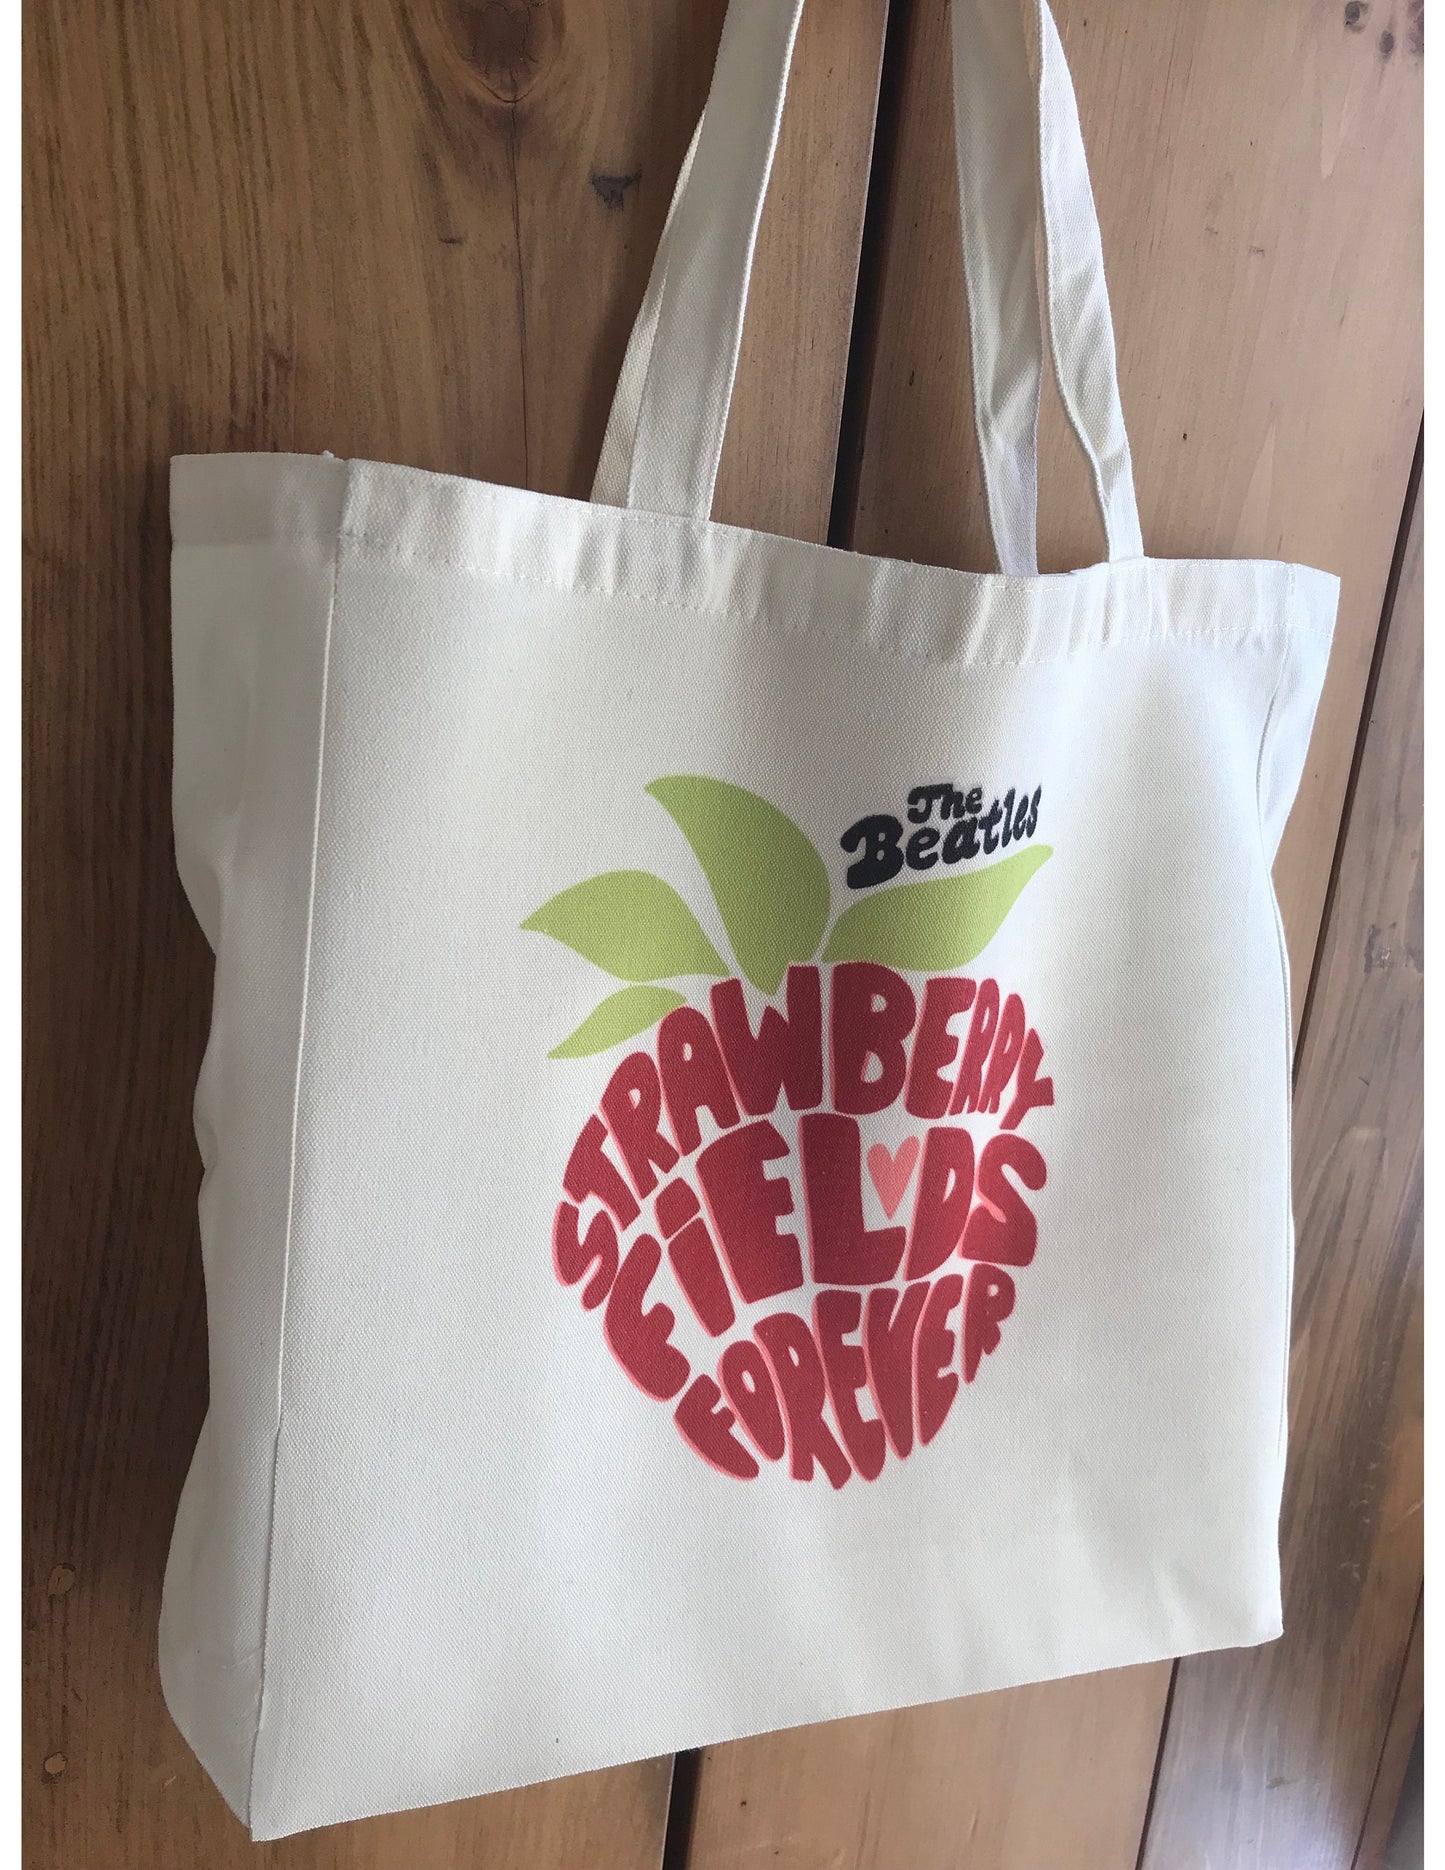 Beatles Strawberry Fields Forever Tote Bag